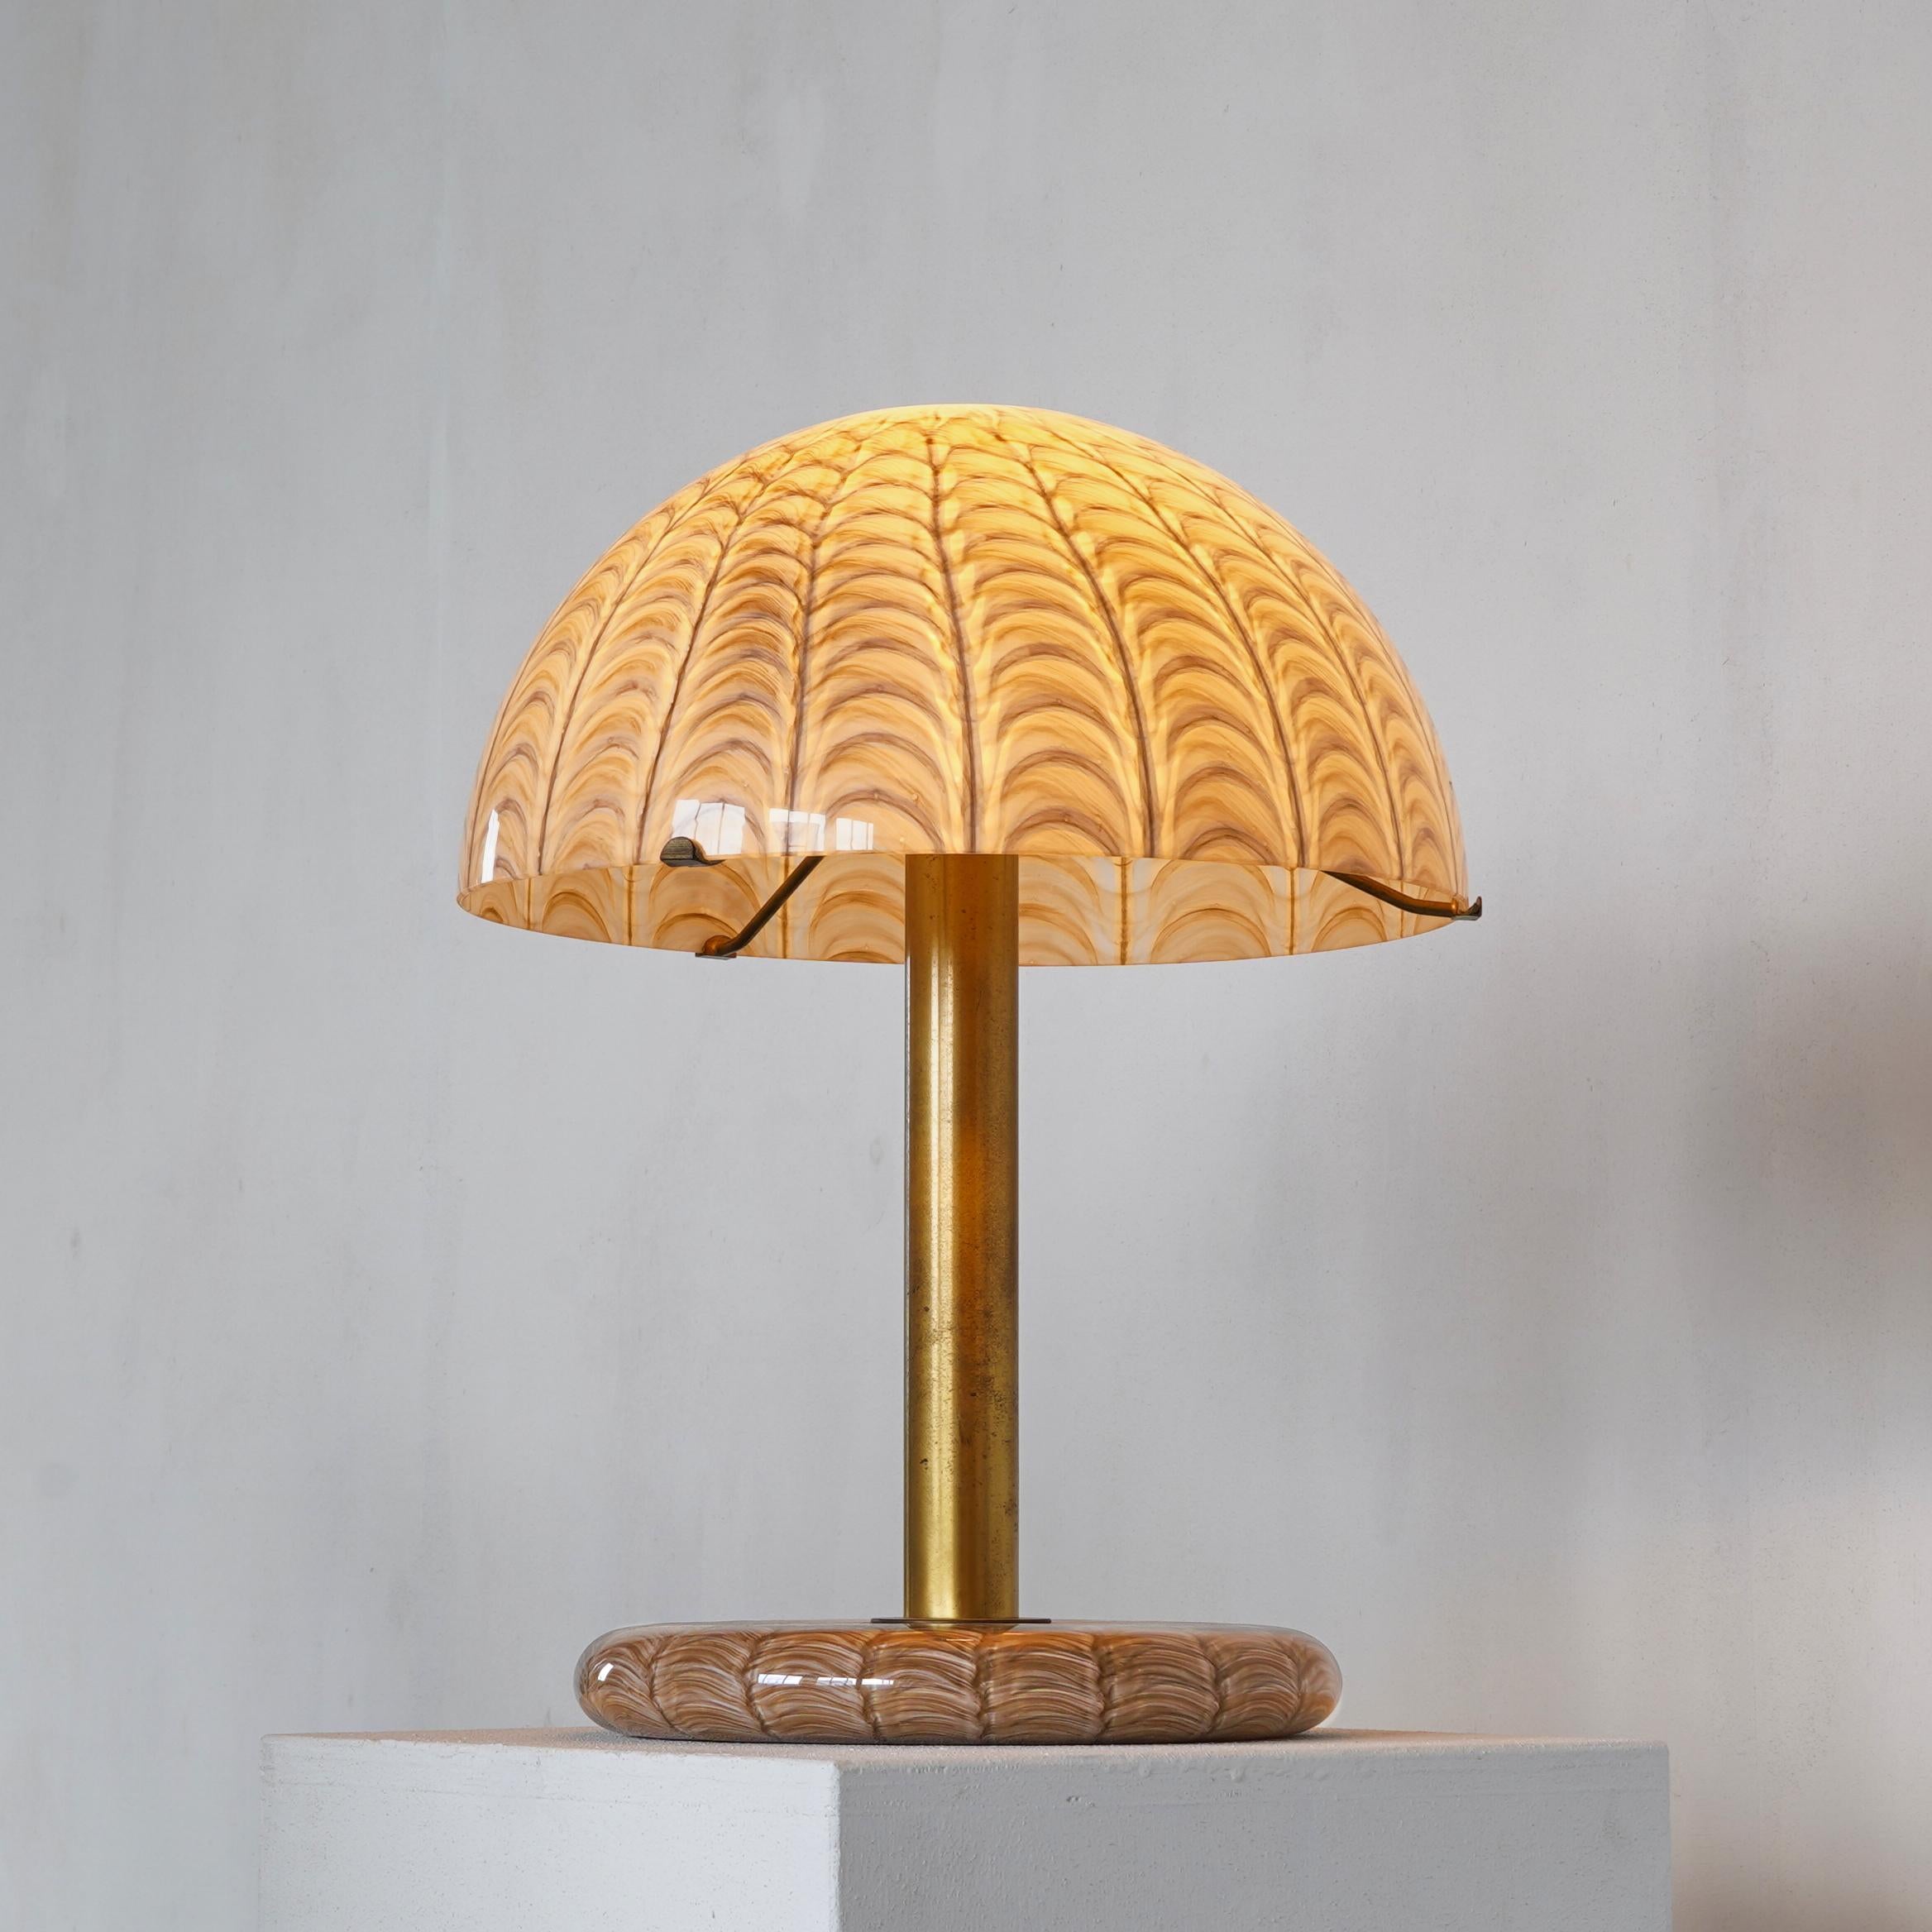 Ludovico Diaz de Santillana Venini Table Lamp, Italy, 1960s.

This rare table lamp shows the exquisite finesse of the work of Ludovico Diaz de Santillana (1931-1989). Its large shade is very thin and shows this highly remarkable immersive pattern,